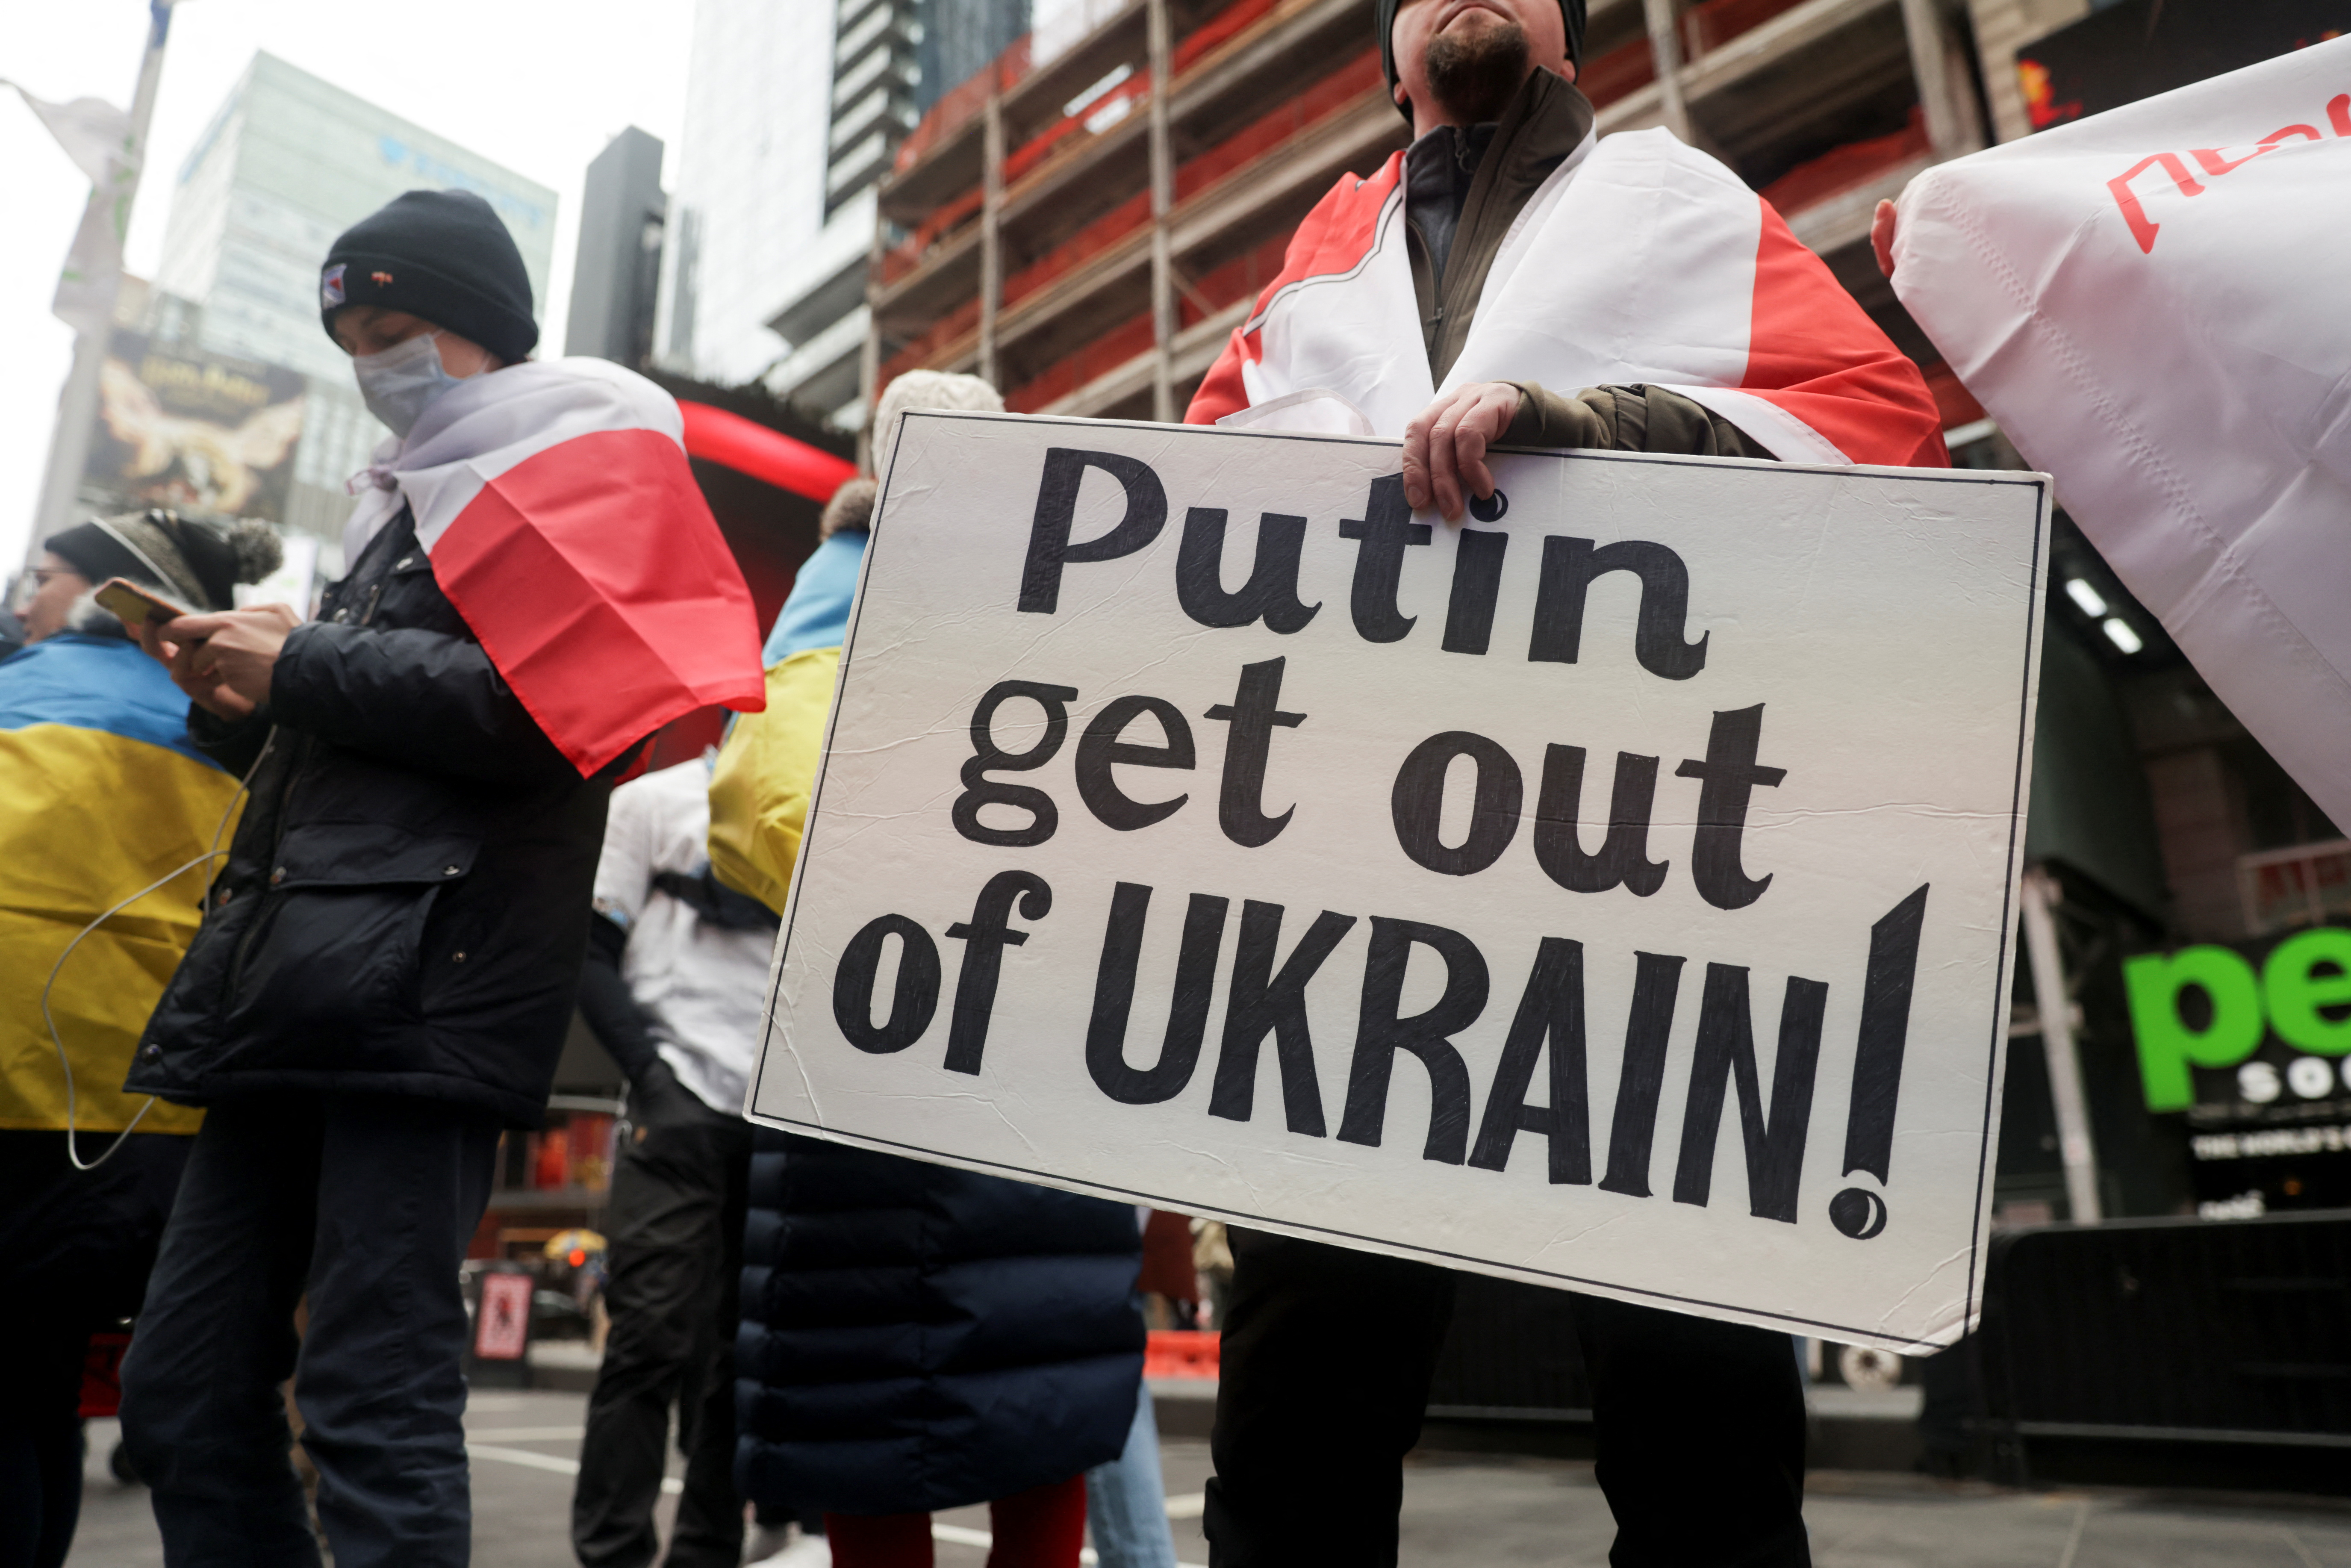 People take part in a protest against Russia's military operation in Ukraine, in Times Square, in New York City, U.S., February 24, 2022. REUTERS/Jeenah Moon